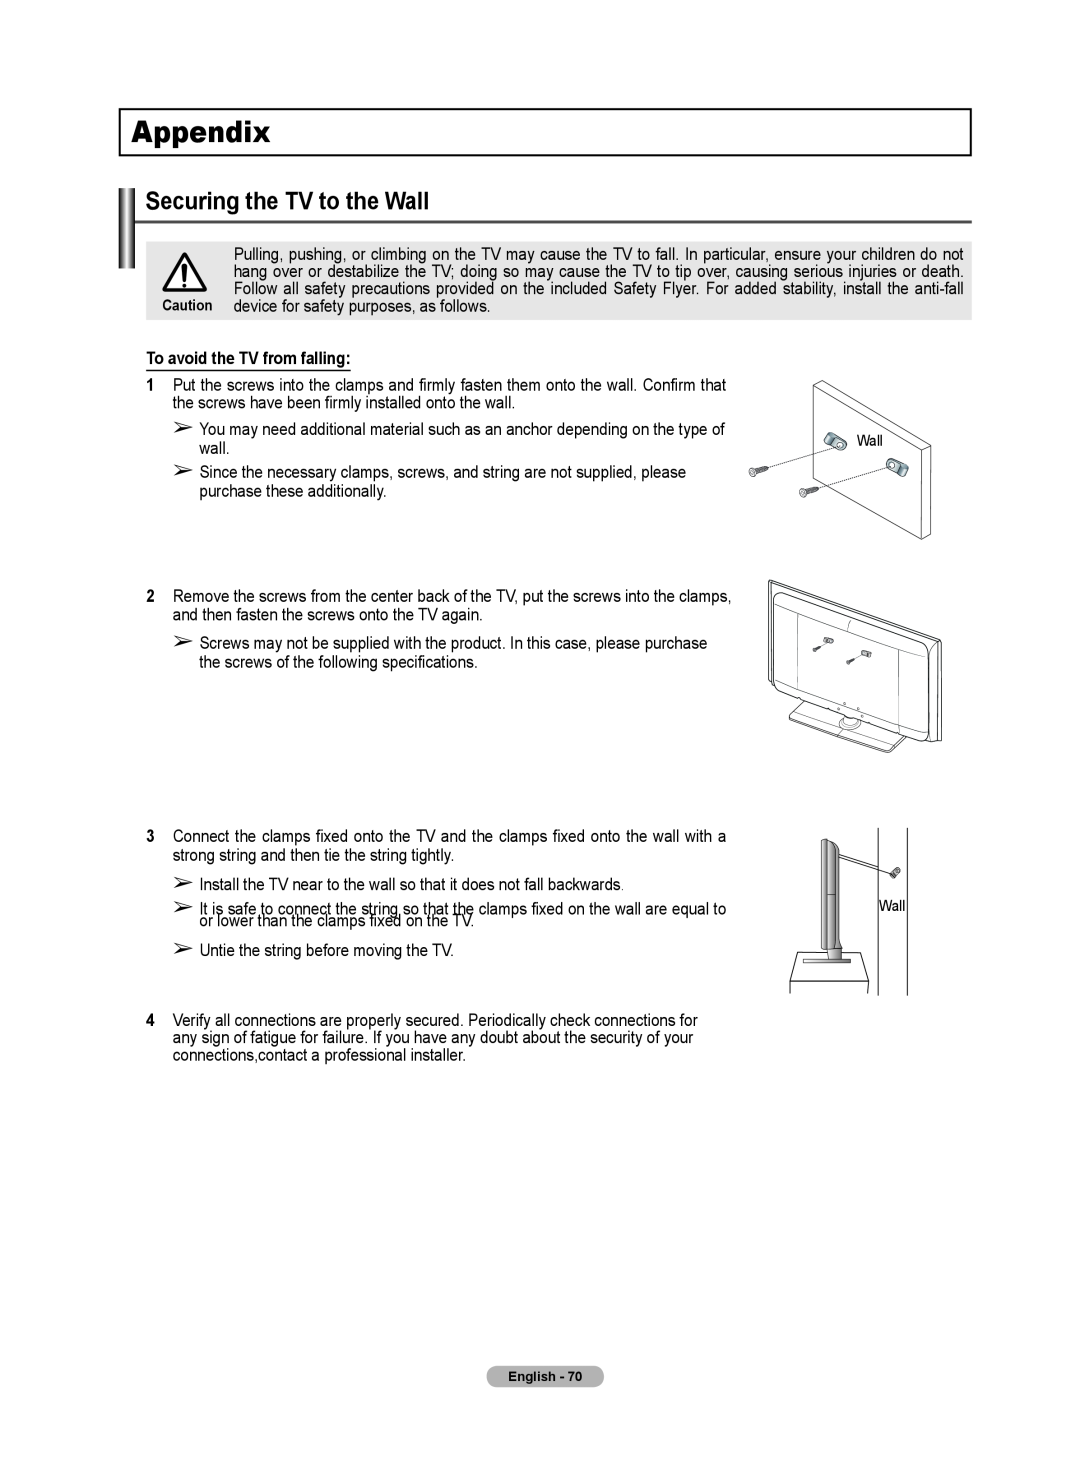 Samsung 510 user manual Appendix, Securing the TV to the Wall, To avoid the TV from falling 